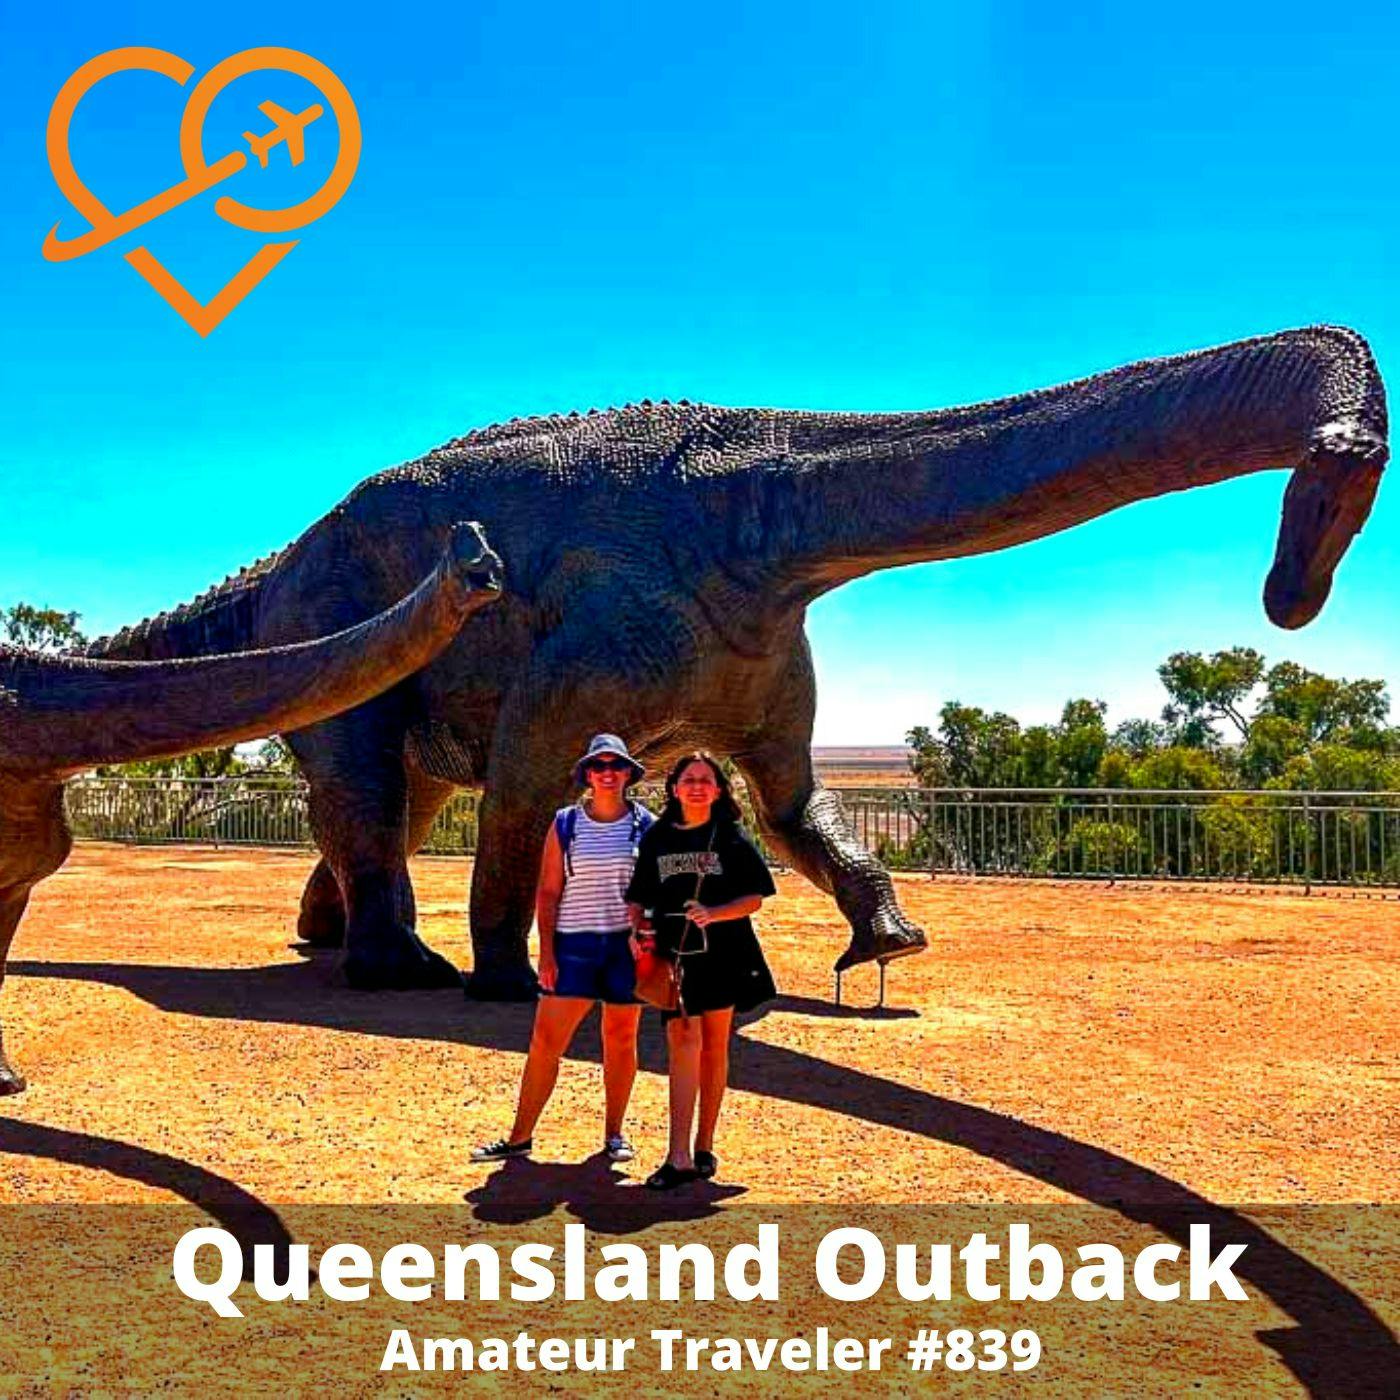 AT#839 - Travel to the Queensland Outback, Australia